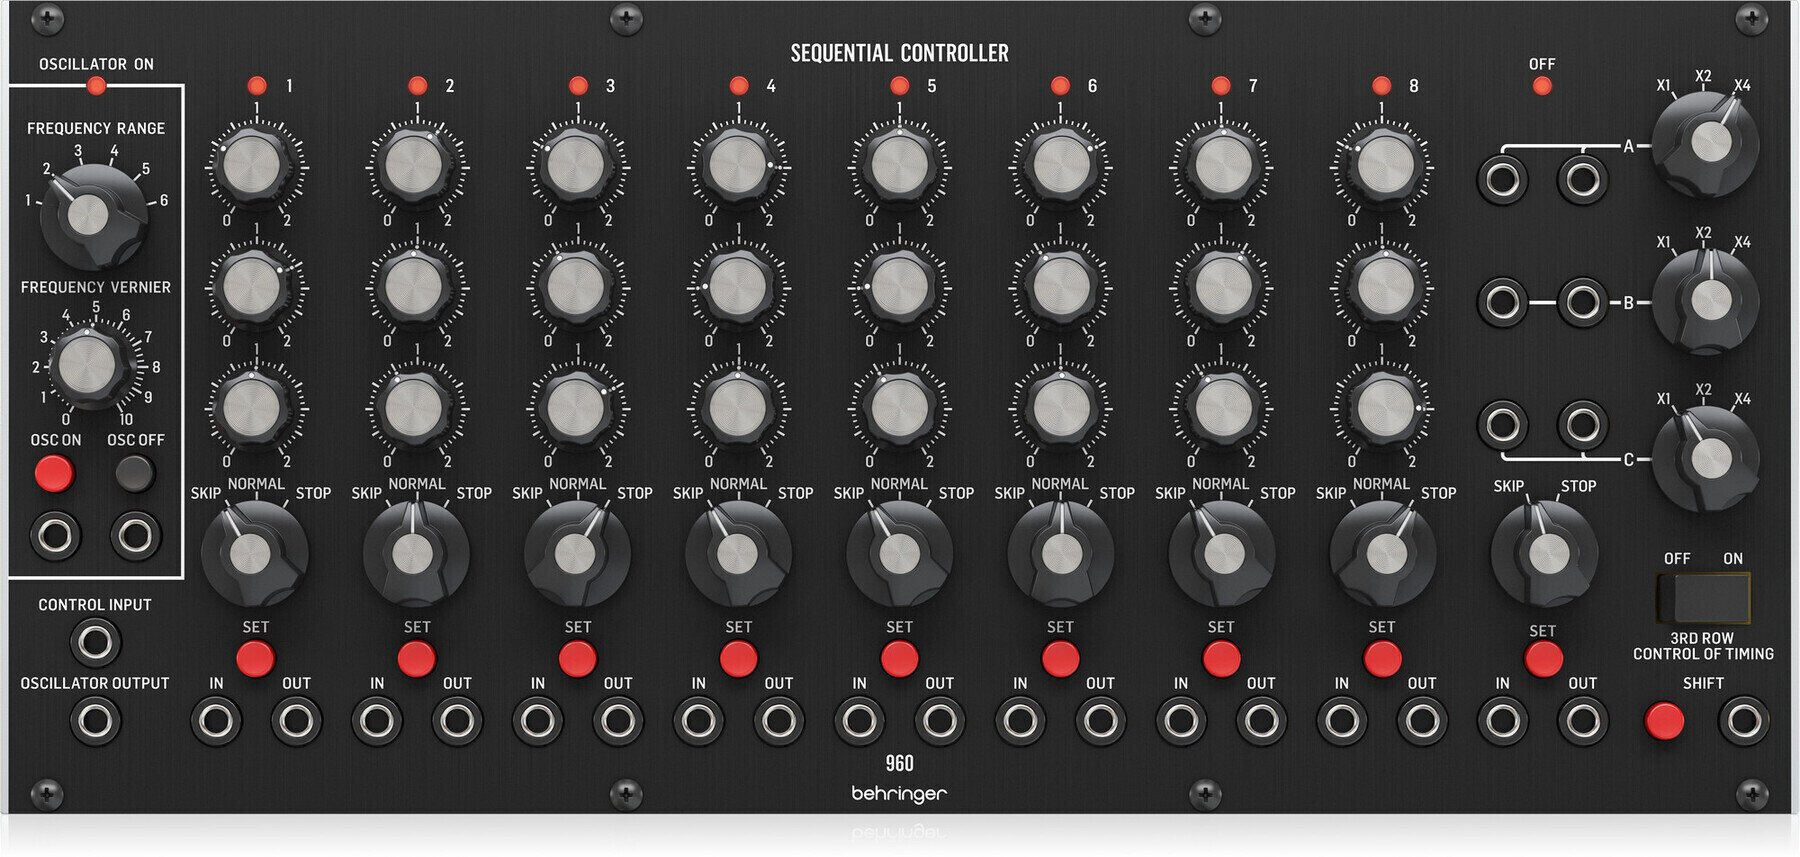 Système modulaire Behringer 960 Sequential Controller